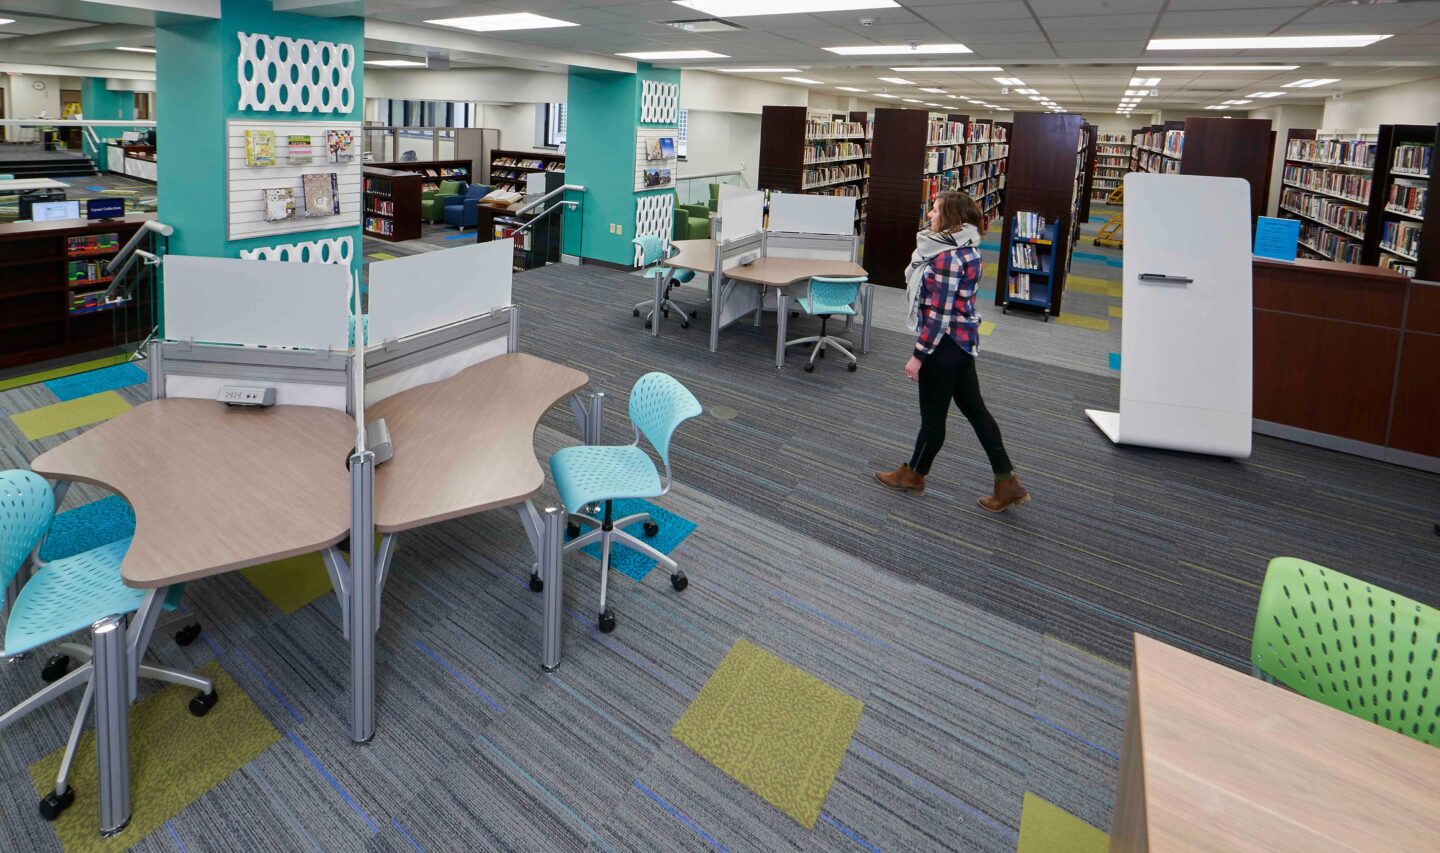 A student walks through a colorful library space with work tables and bookshelves